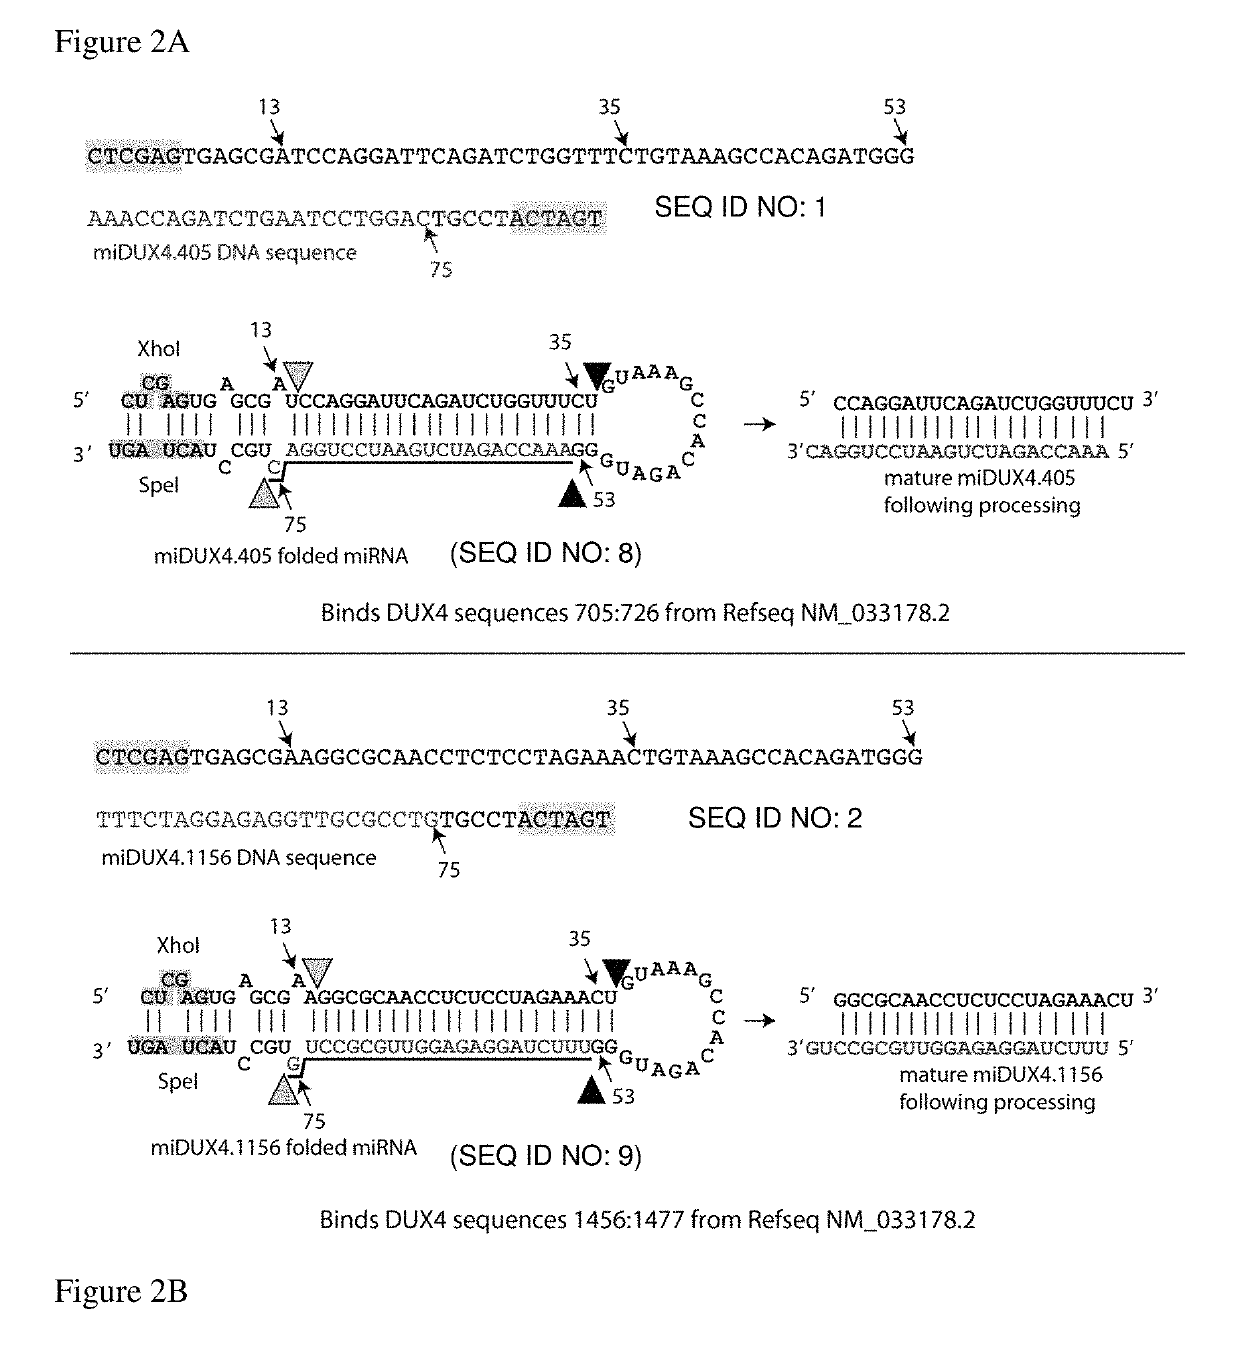 Recombinant virus products and methods for inhibition of expression of DUX4